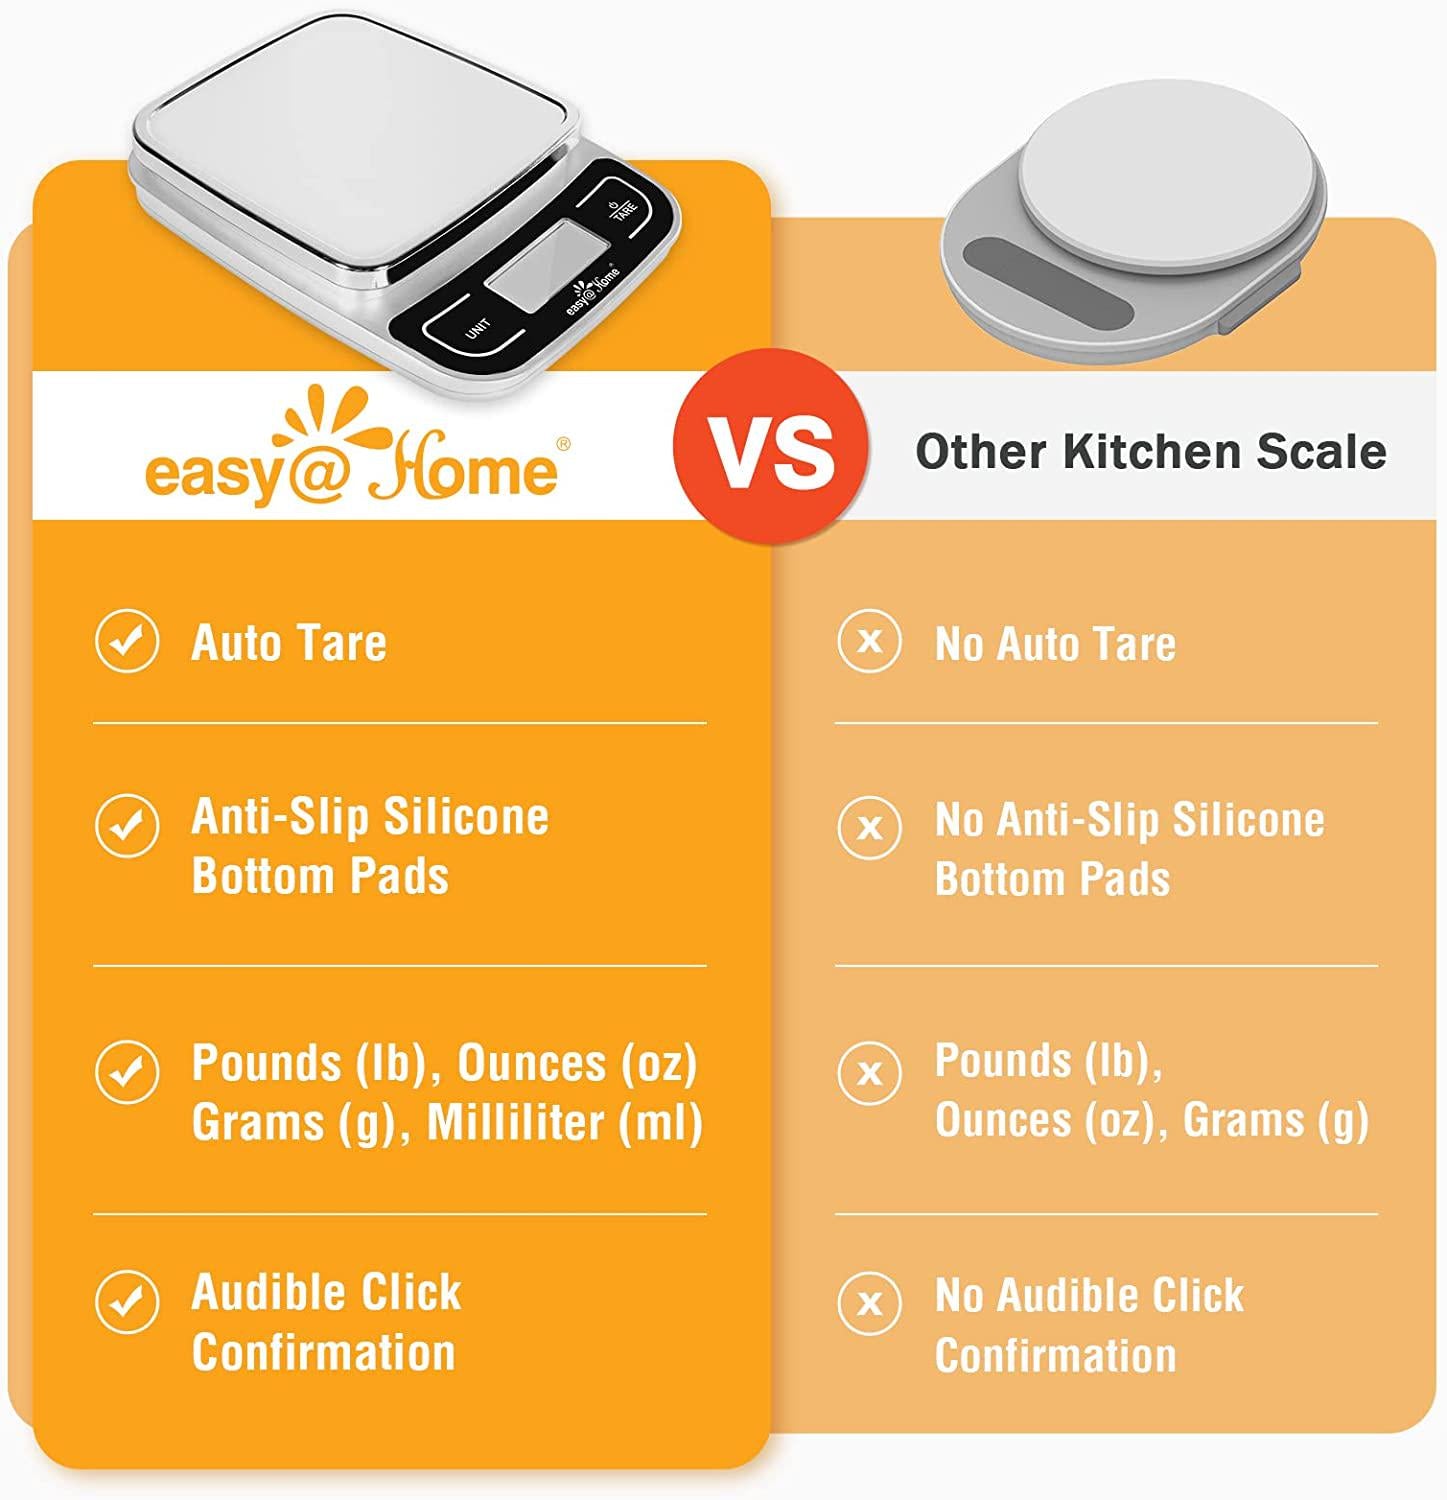 Easy@Home, Easy@Home Digital Kitchen Scale Food Scale with High Precision to 0.04oz and 11 lbs Capacity, Digital Multifunction Measuring Scale